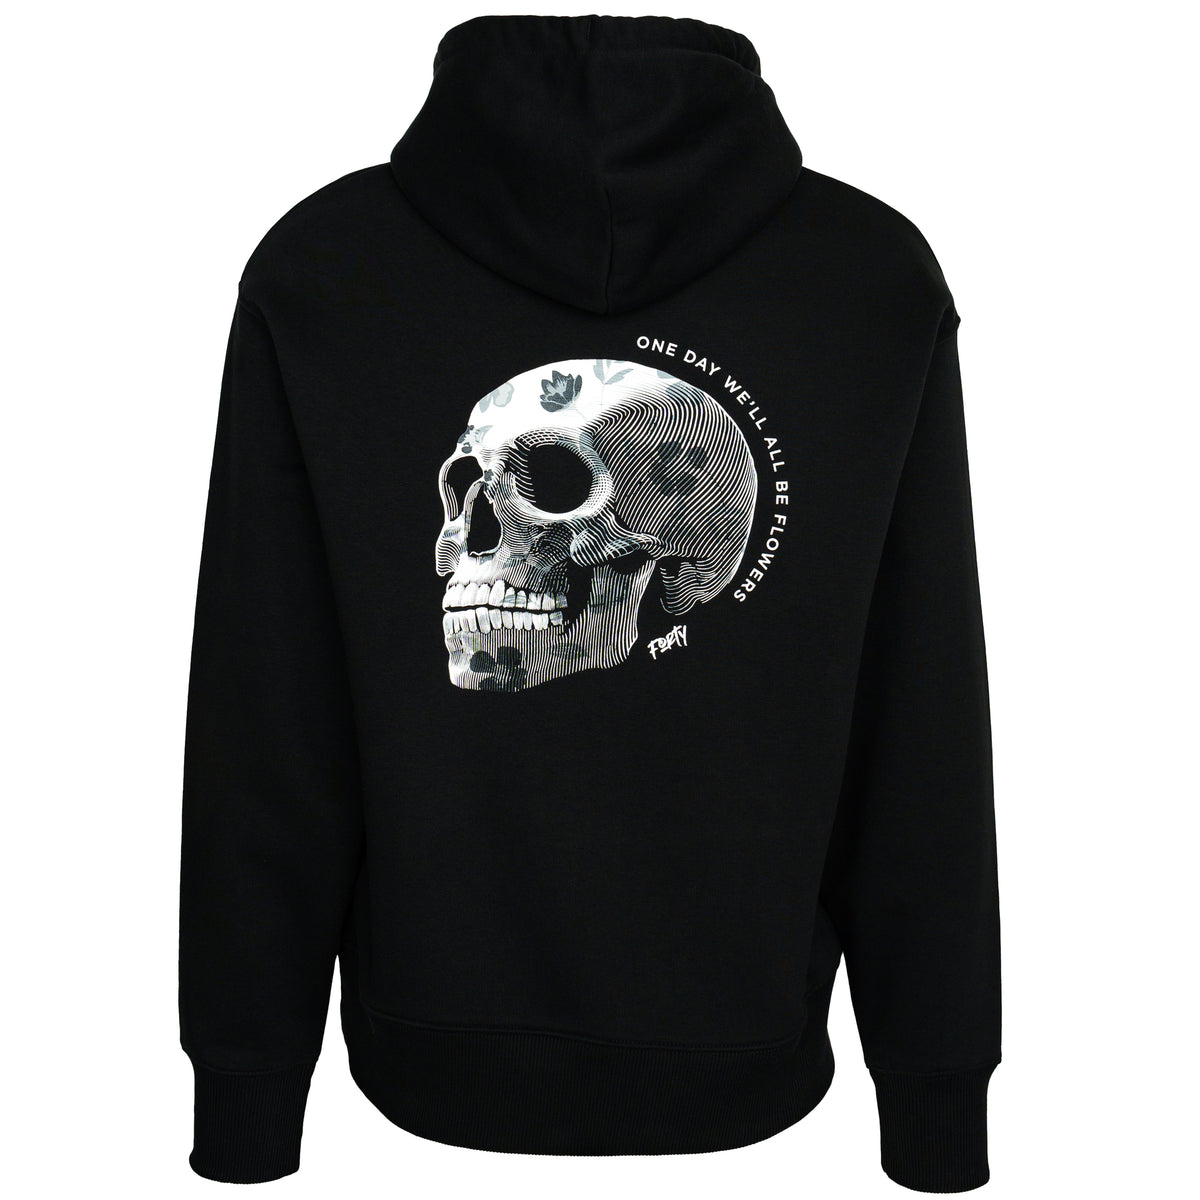 Load image into Gallery viewer, Forty Black Incarnation Hoodie
